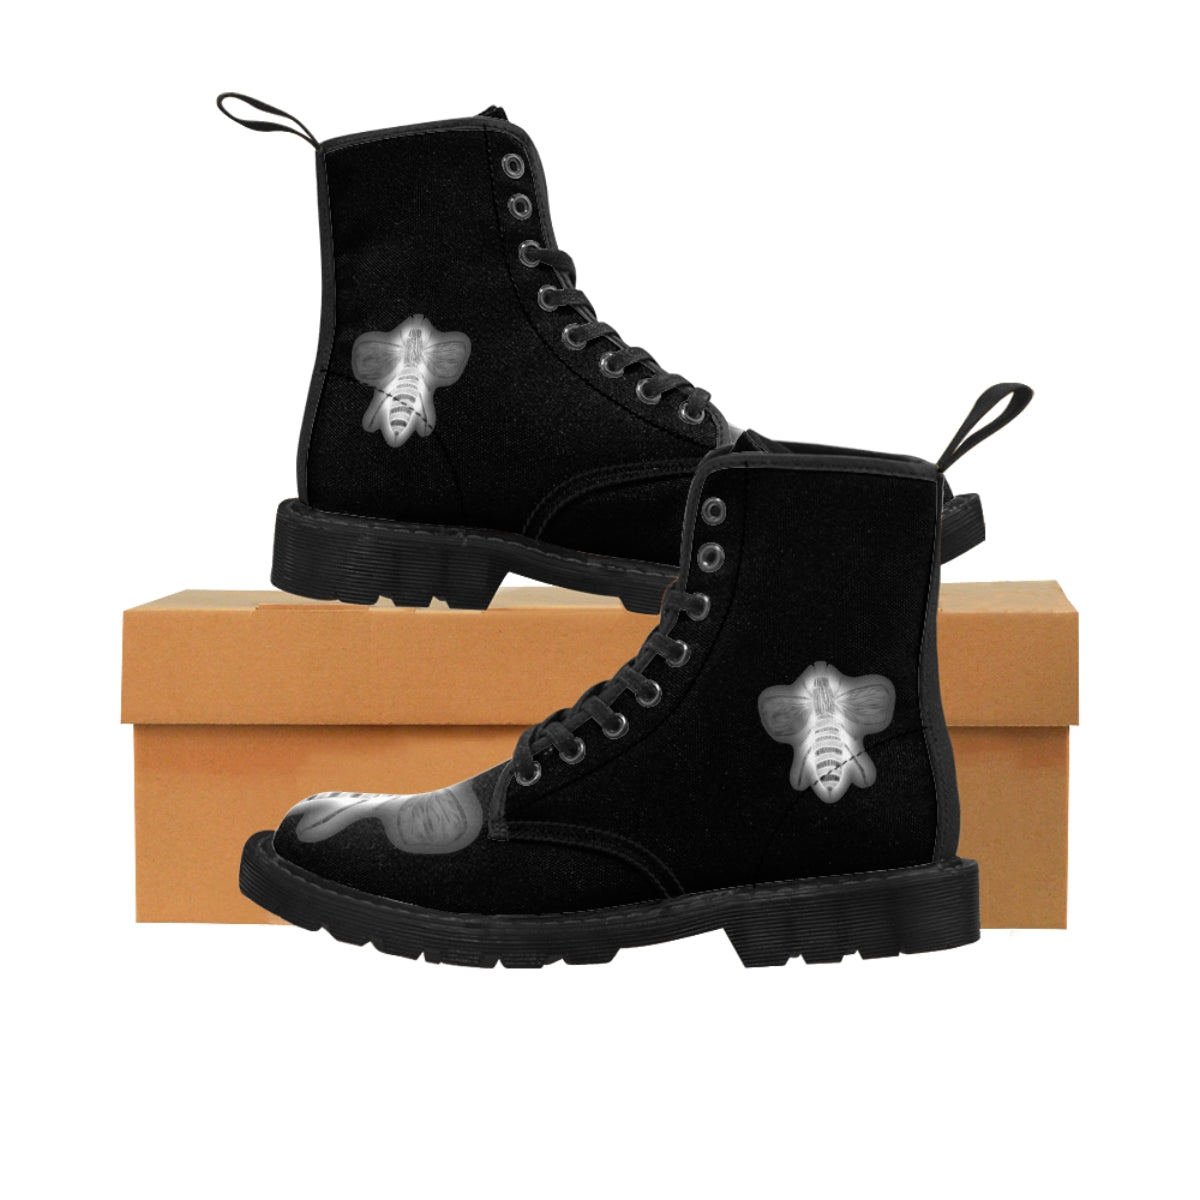 Negative Bee Women's Black Canvas Boots Black Shoes Bee boots combat boots fun womens boots original art boots Shoes unique womens boots vegan boots vegan combat boots womens black boots womens boots womens fashion boots